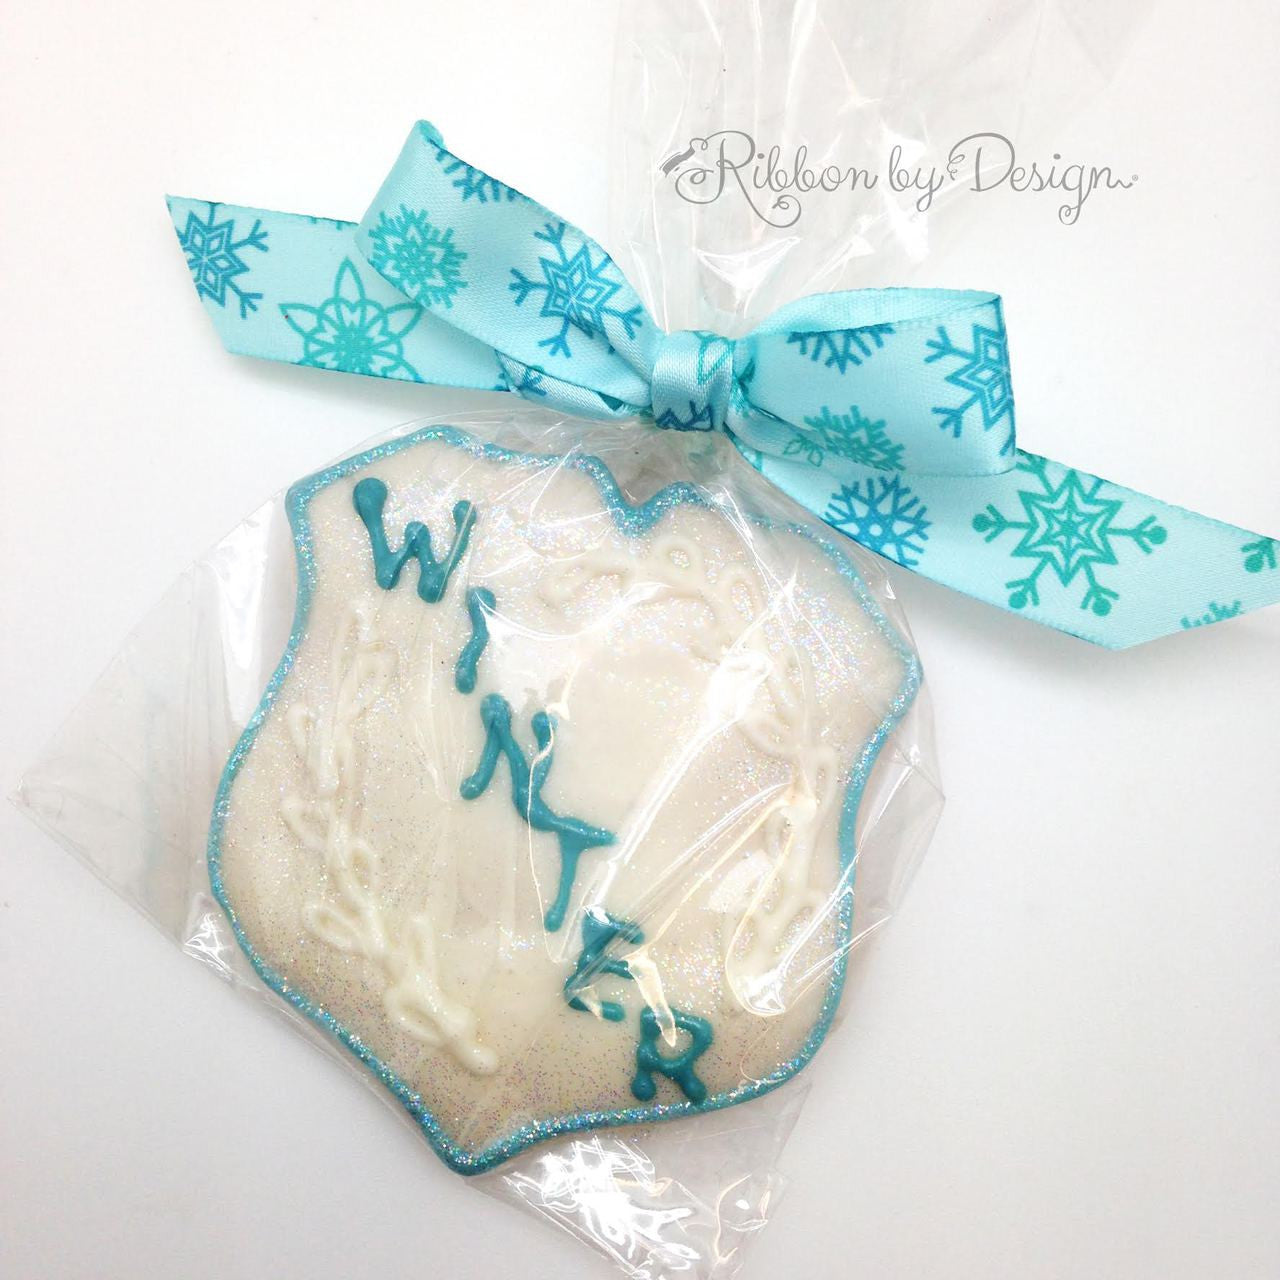 Pretty little Winter cookie looks even sweeter tied with our blue snowflake ribbon!